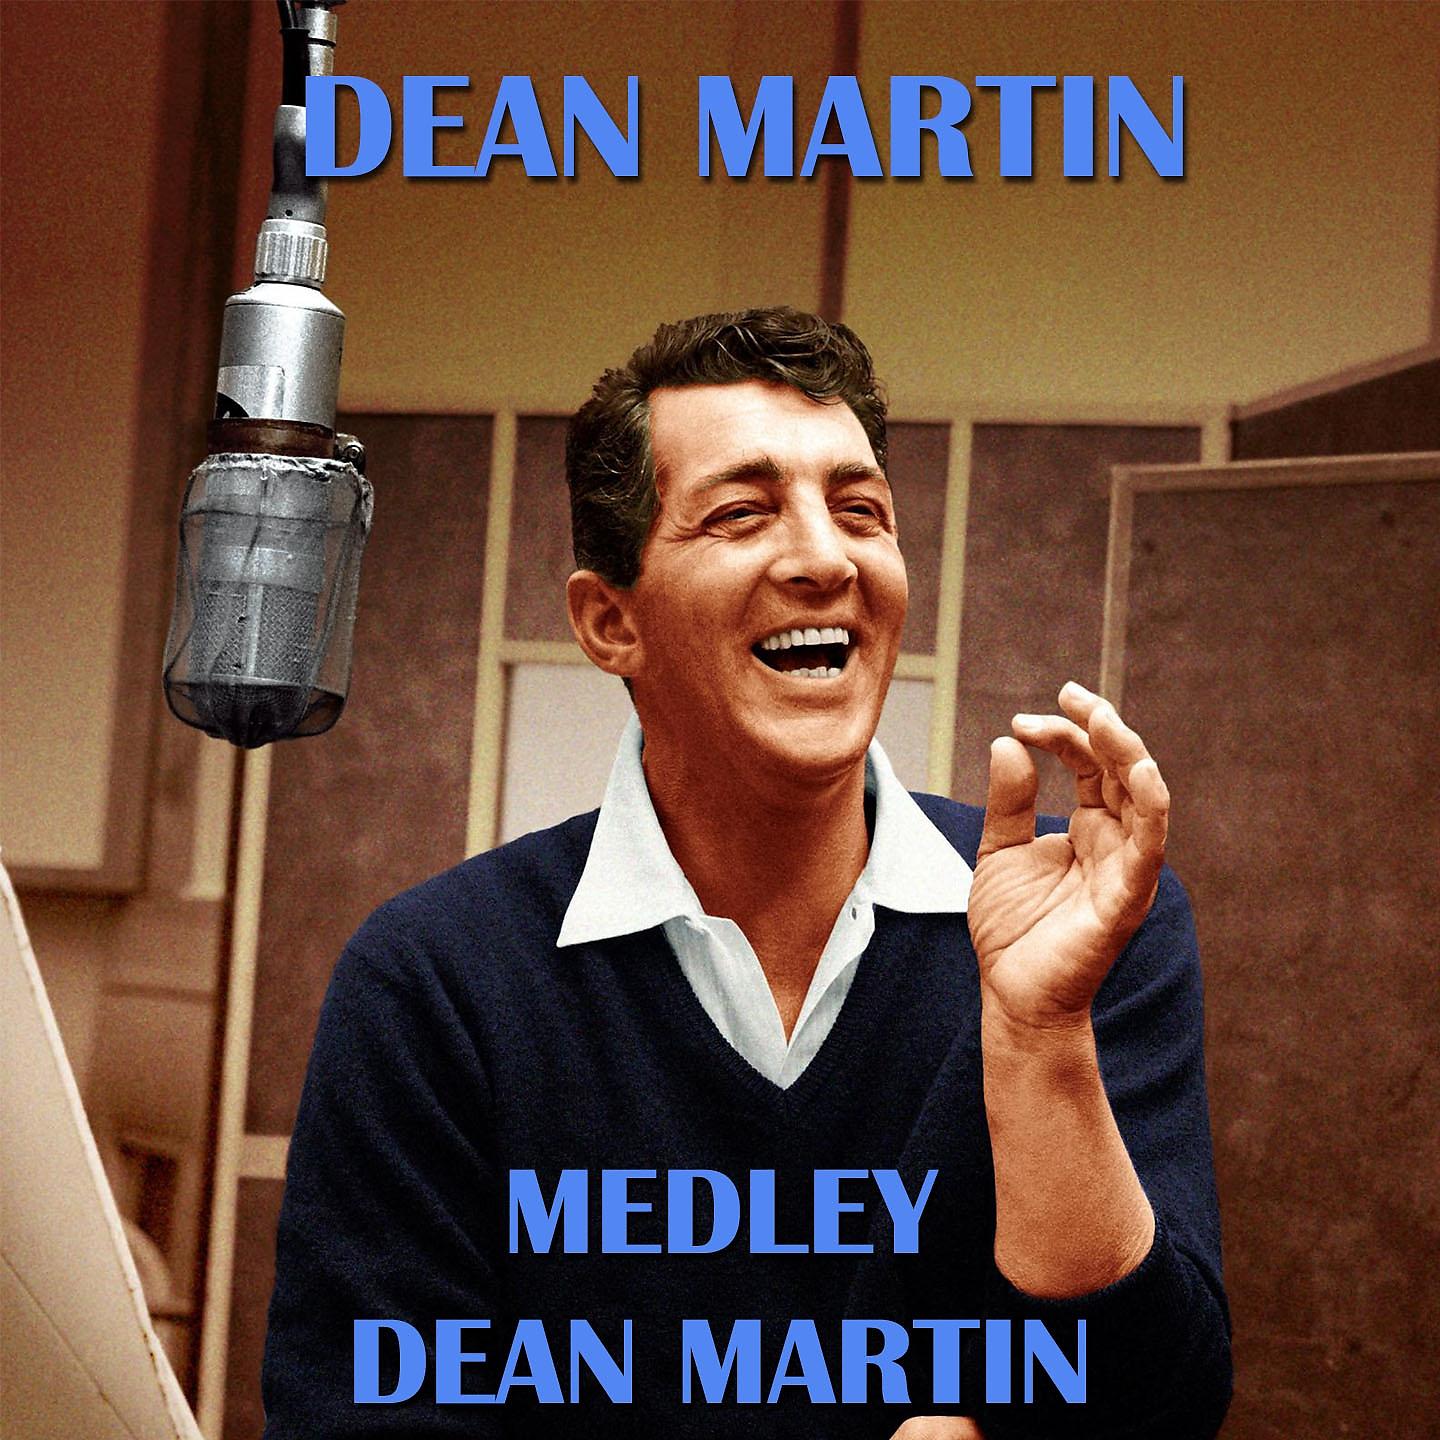 Постер альбома Dean Martin Medley 2: Return to Me / Memories Are Made of This / Street of Love / Georgia on My Mind / Angel Baby / How Do You Speak to an Angel / Write Me from Naples / Love Is All that Matters / Buona Sera / All I Have to Give to You / Just One More Cha